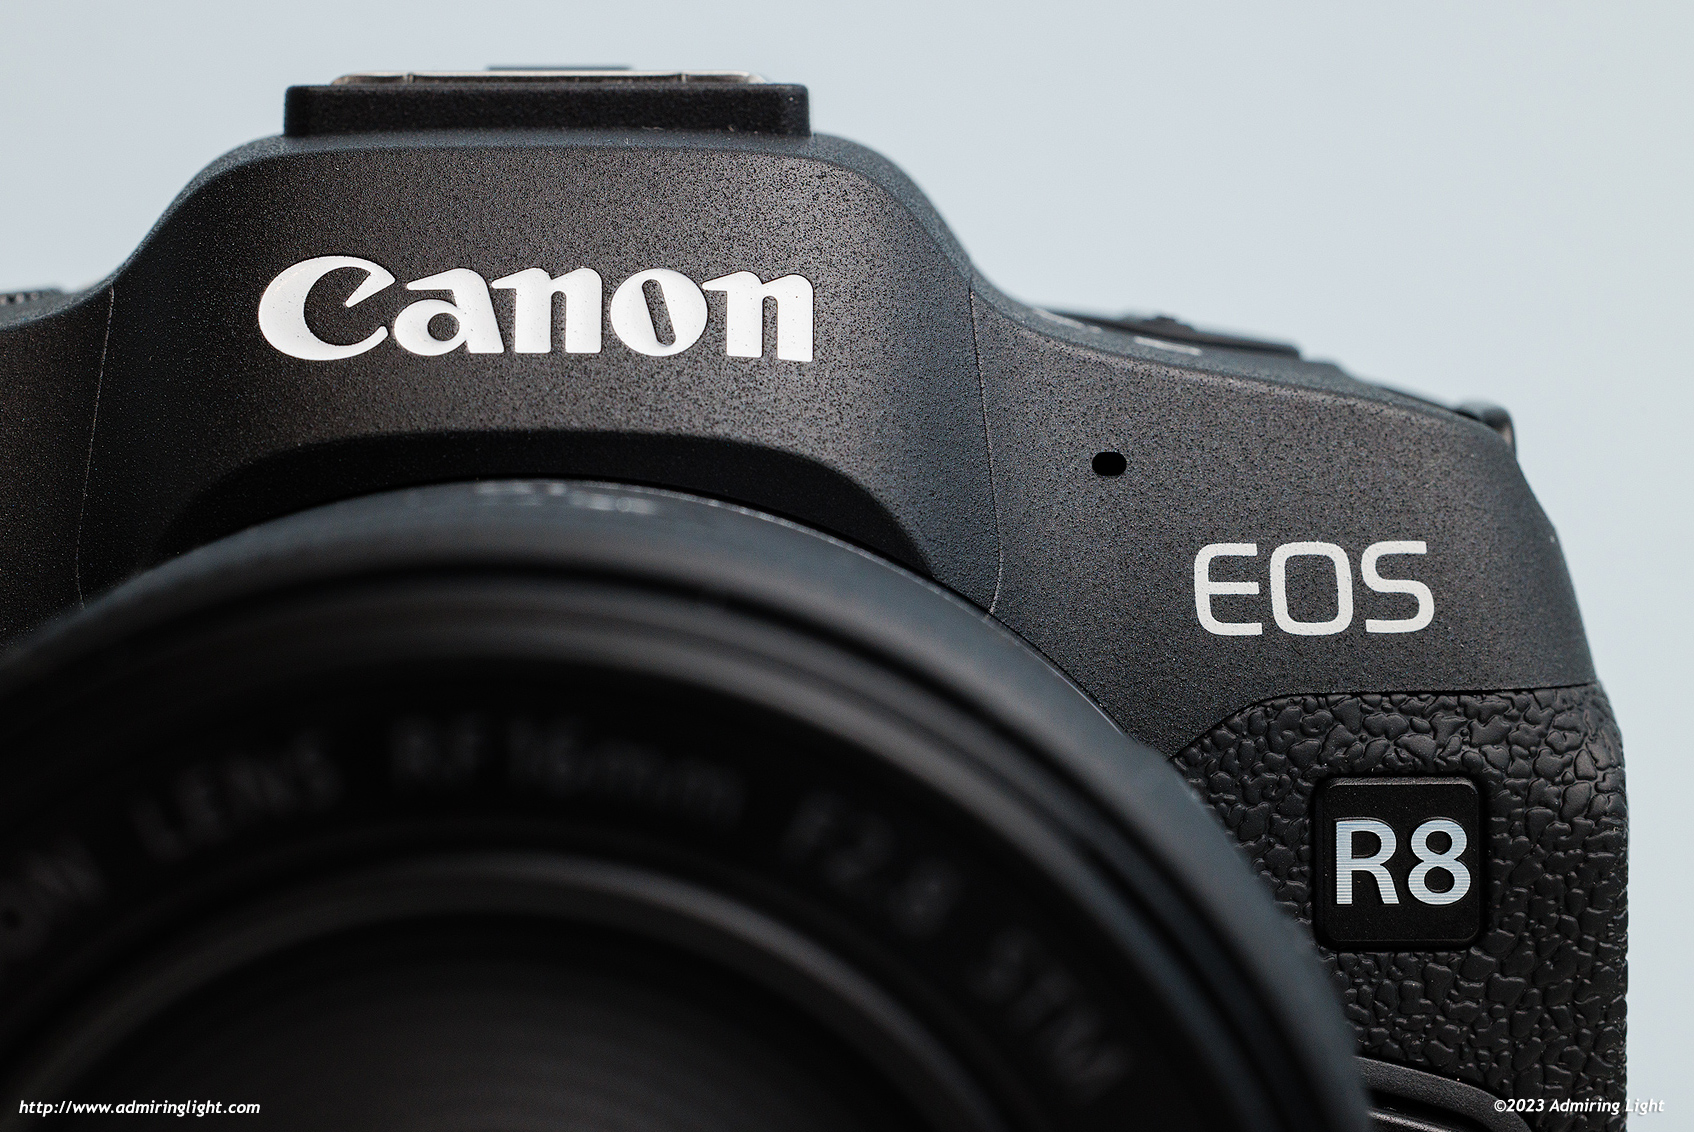 We Review the Canon EOS R8 Mirrorless Full Frame Camera